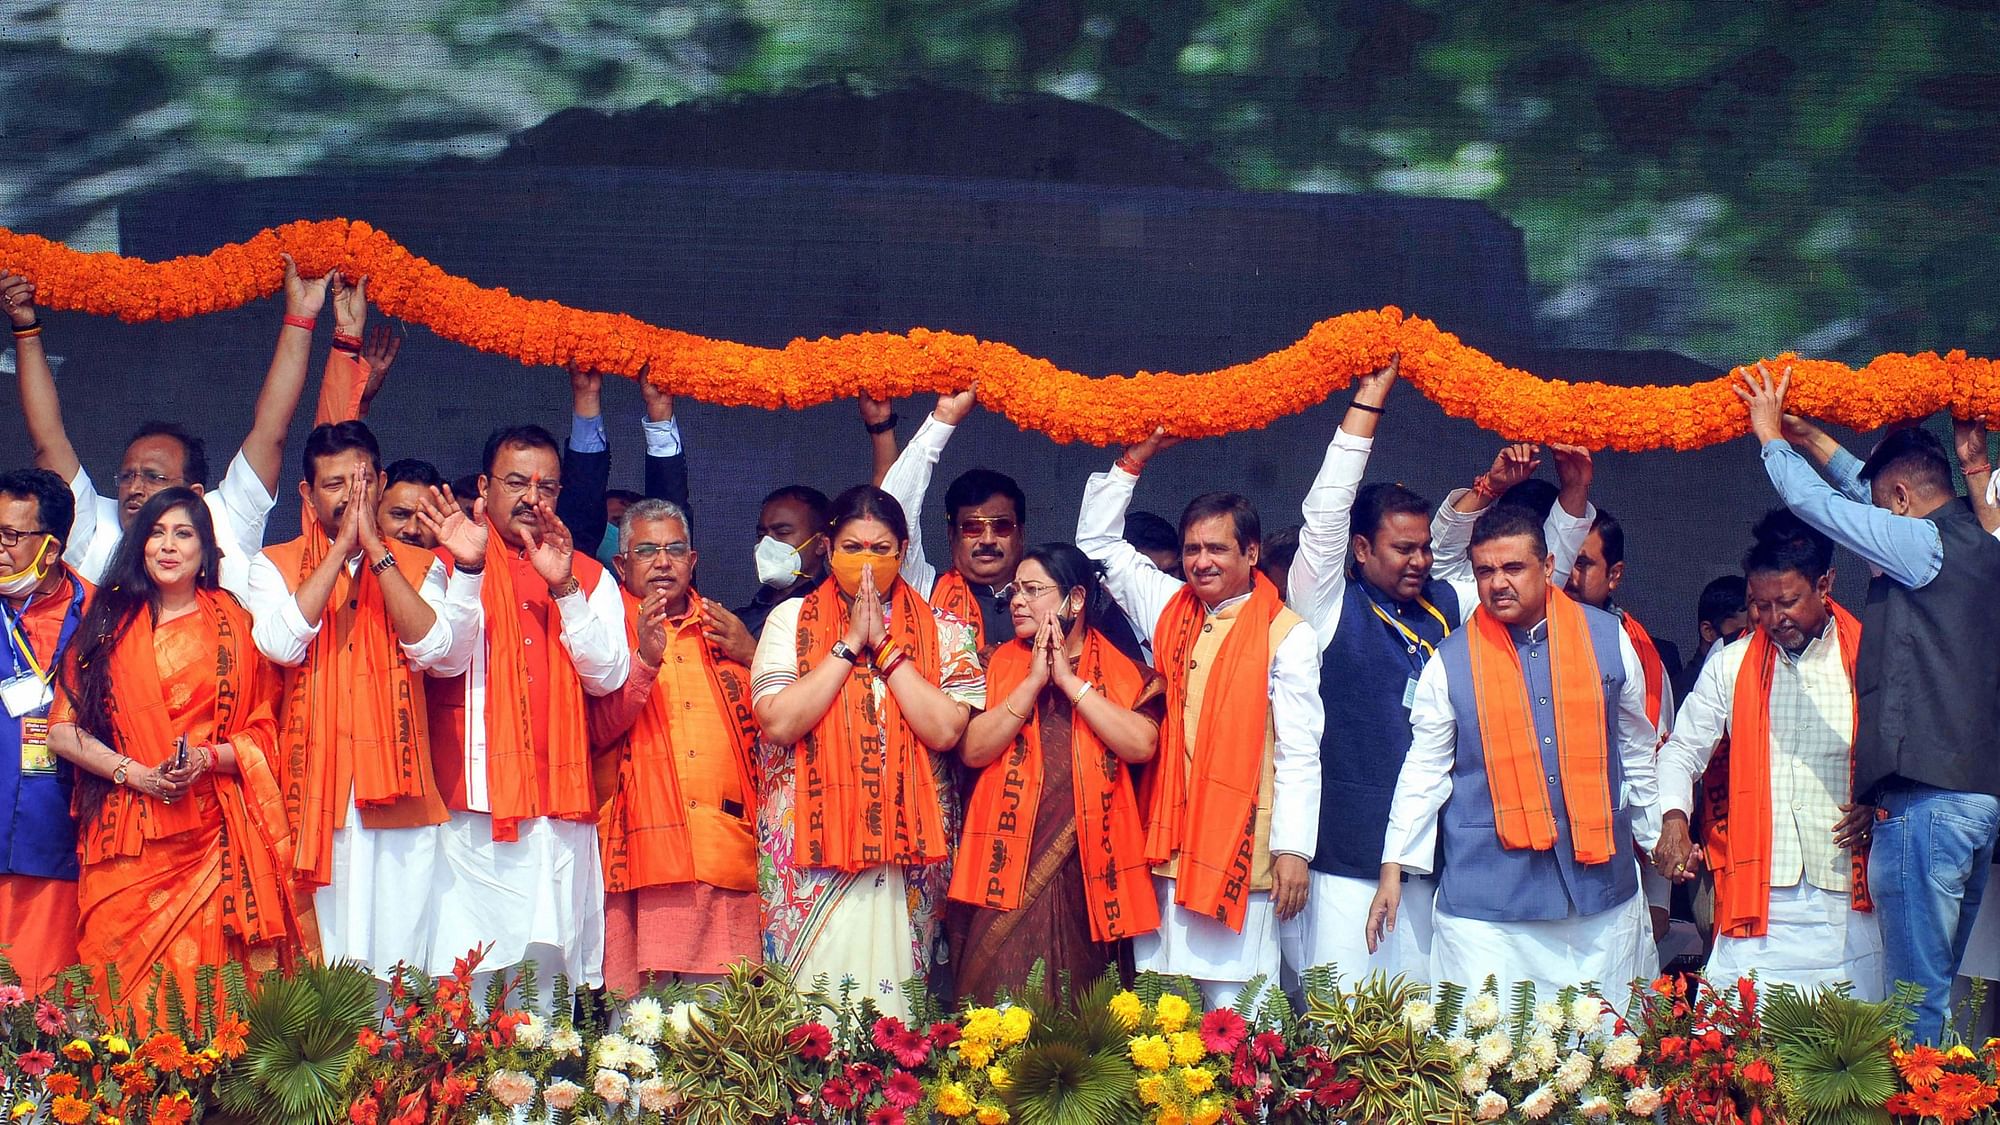 The video is of the BJP’s rally in Howrah held on Sunday, 31 January.